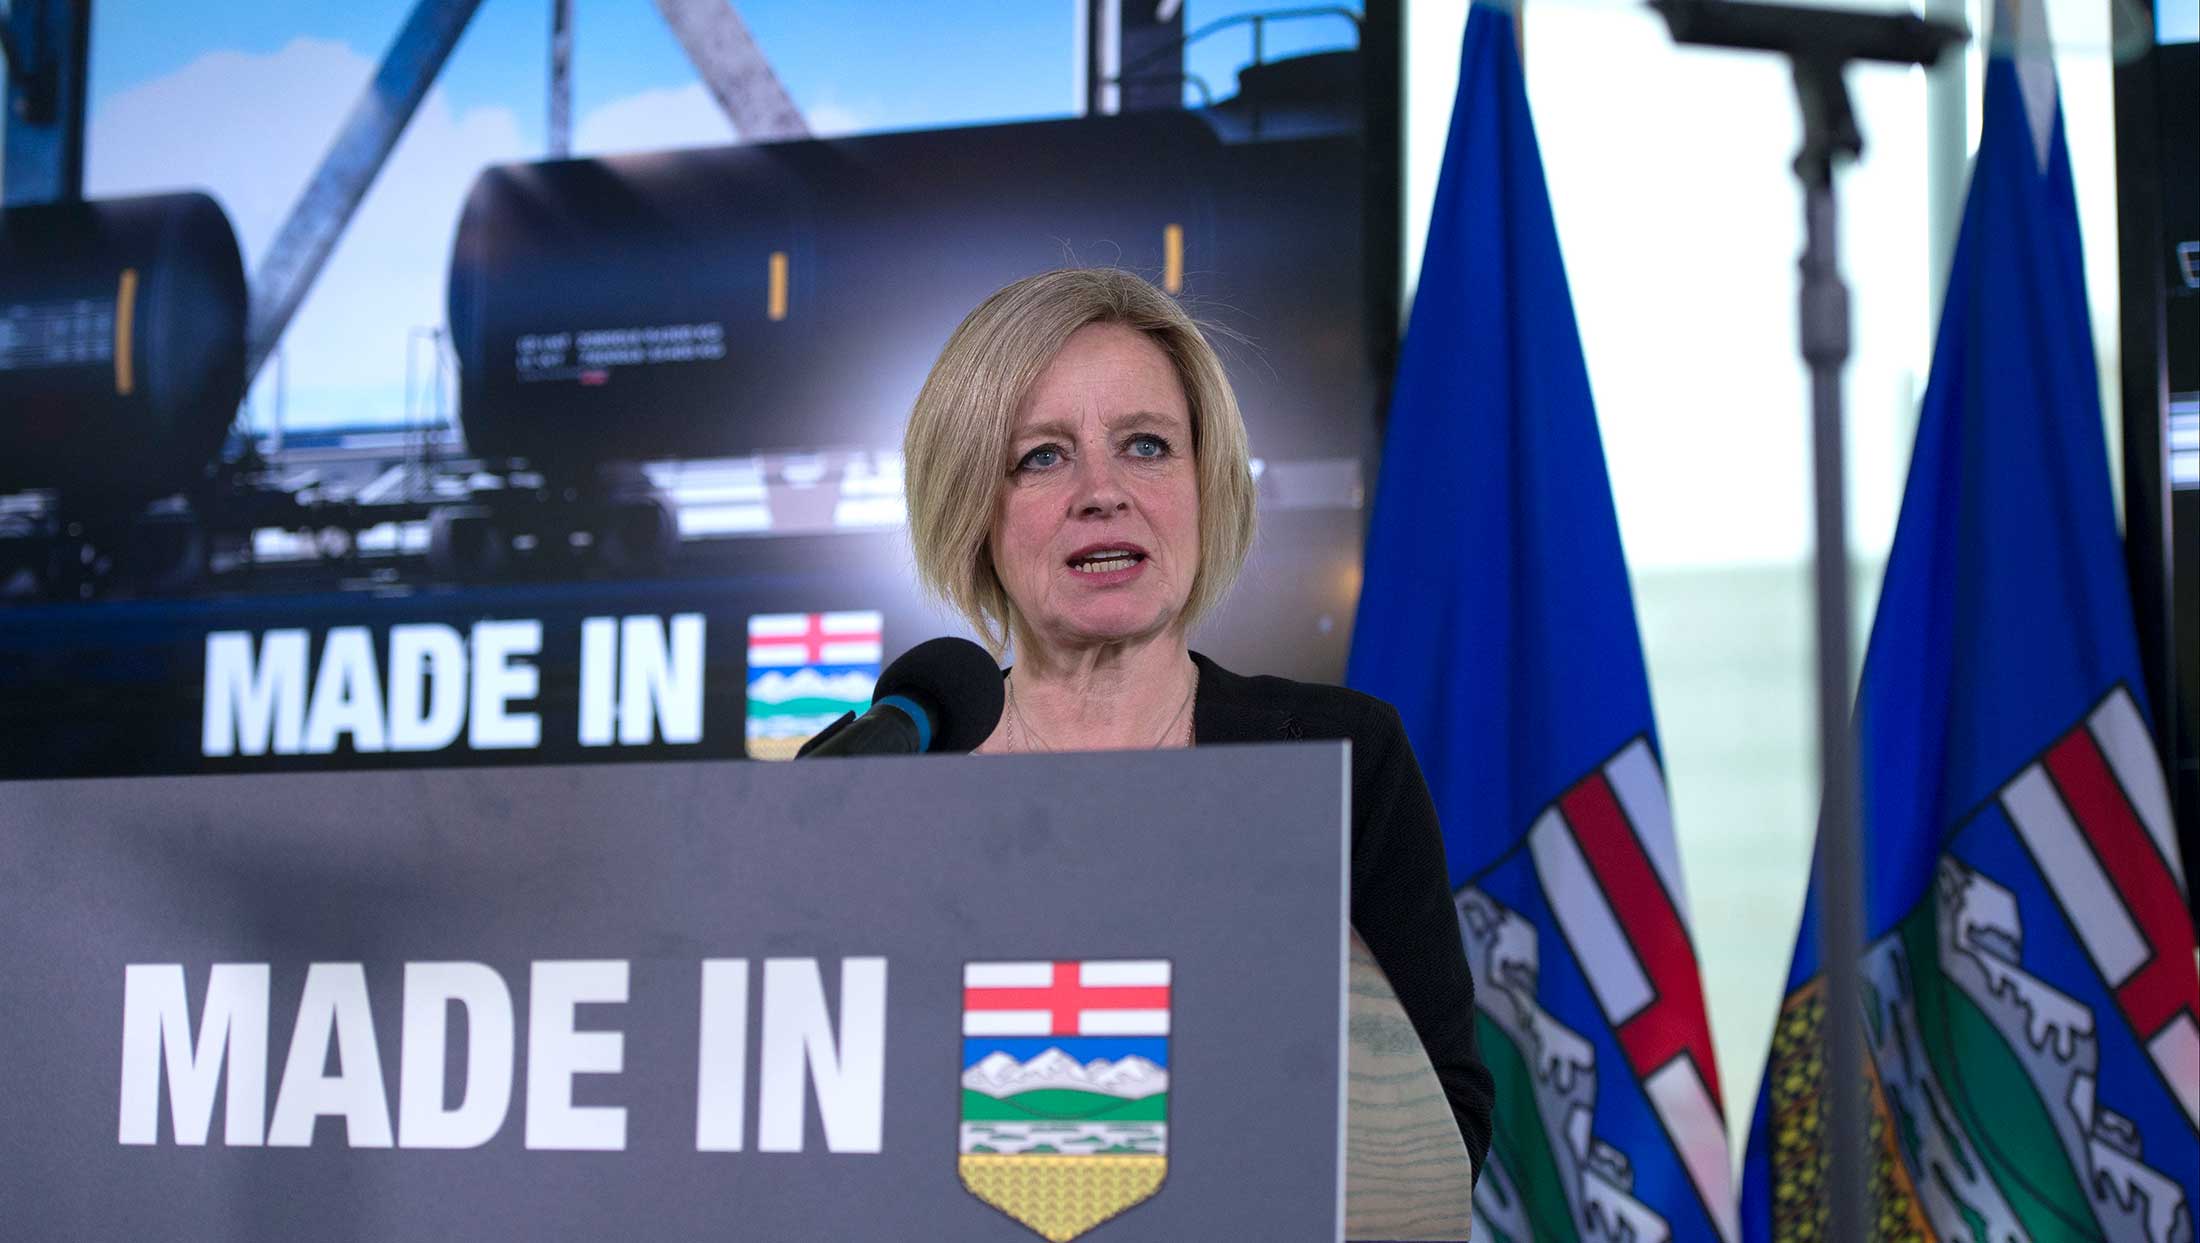 Alberta's renewable energy restrictions will throttle a booming